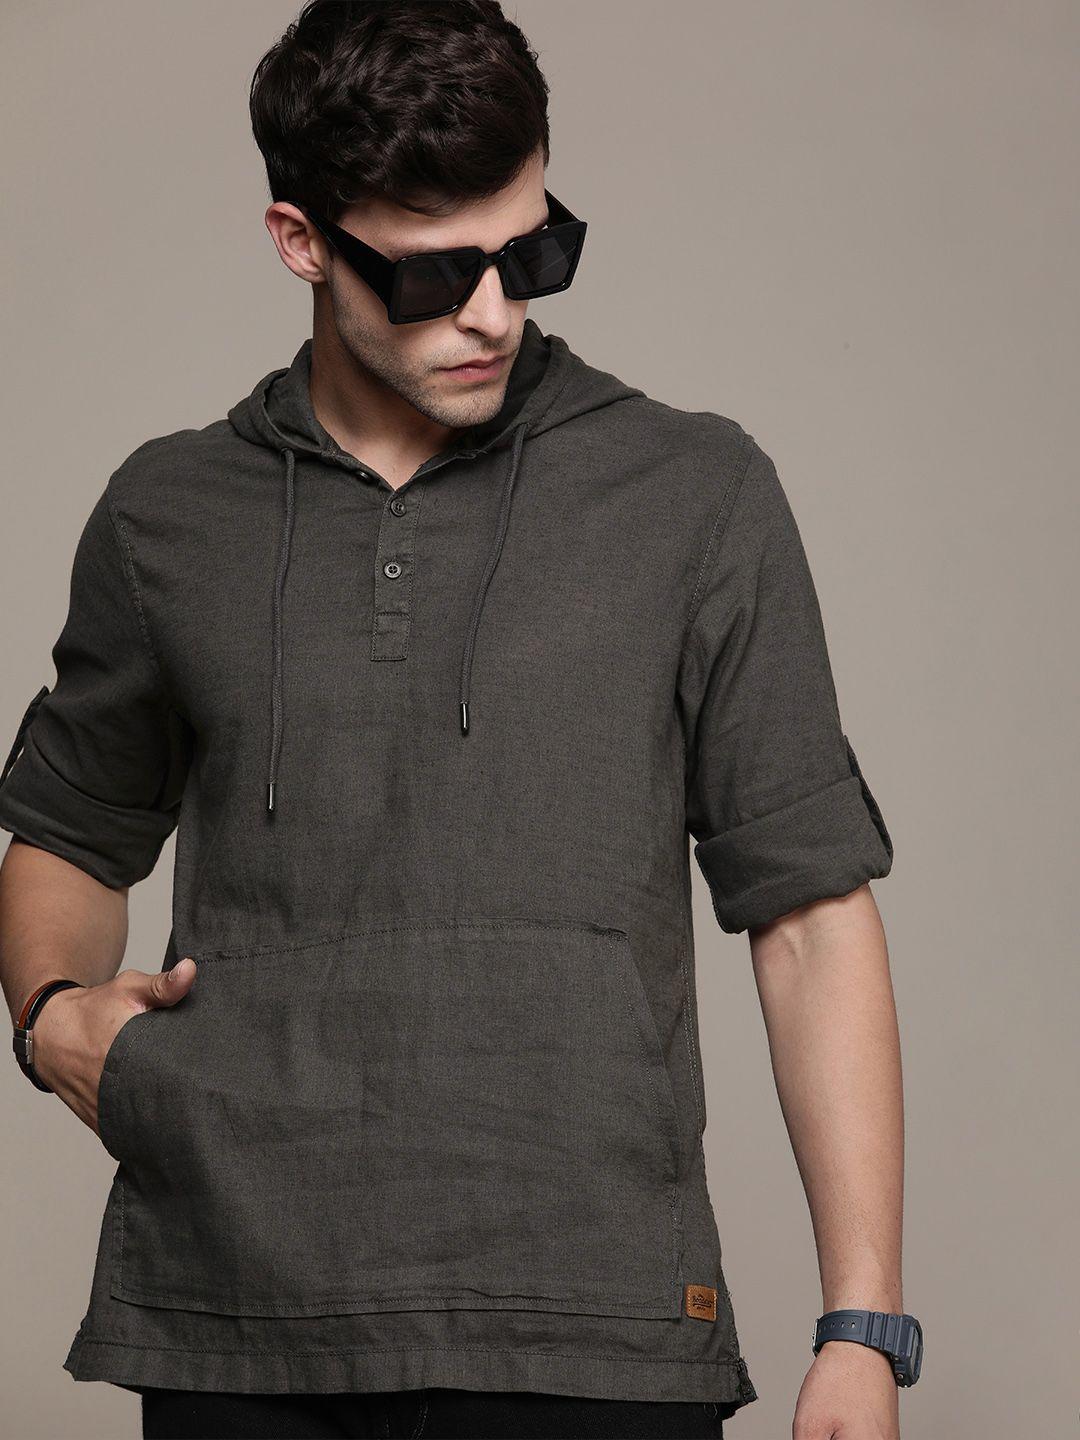 the roadster life co. solid cotton linen hooded casual shirt